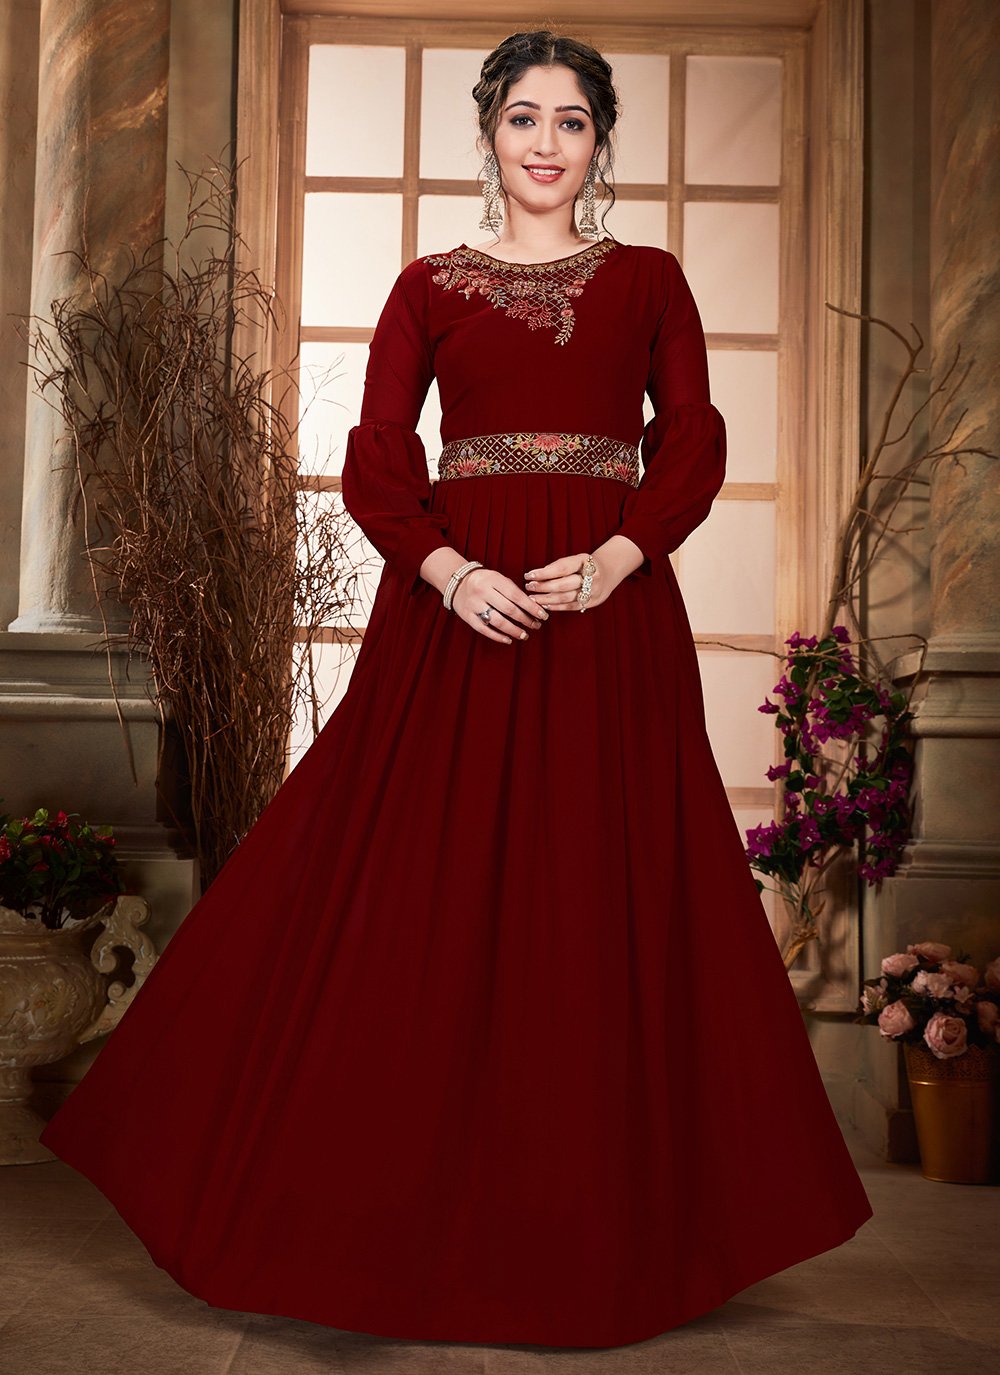 Marvelous Maroon(Color) And Gold Color Gown Premium Quality at Rs  3995/piece | Printed Gown Party Wear in Surat | ID: 19020799797